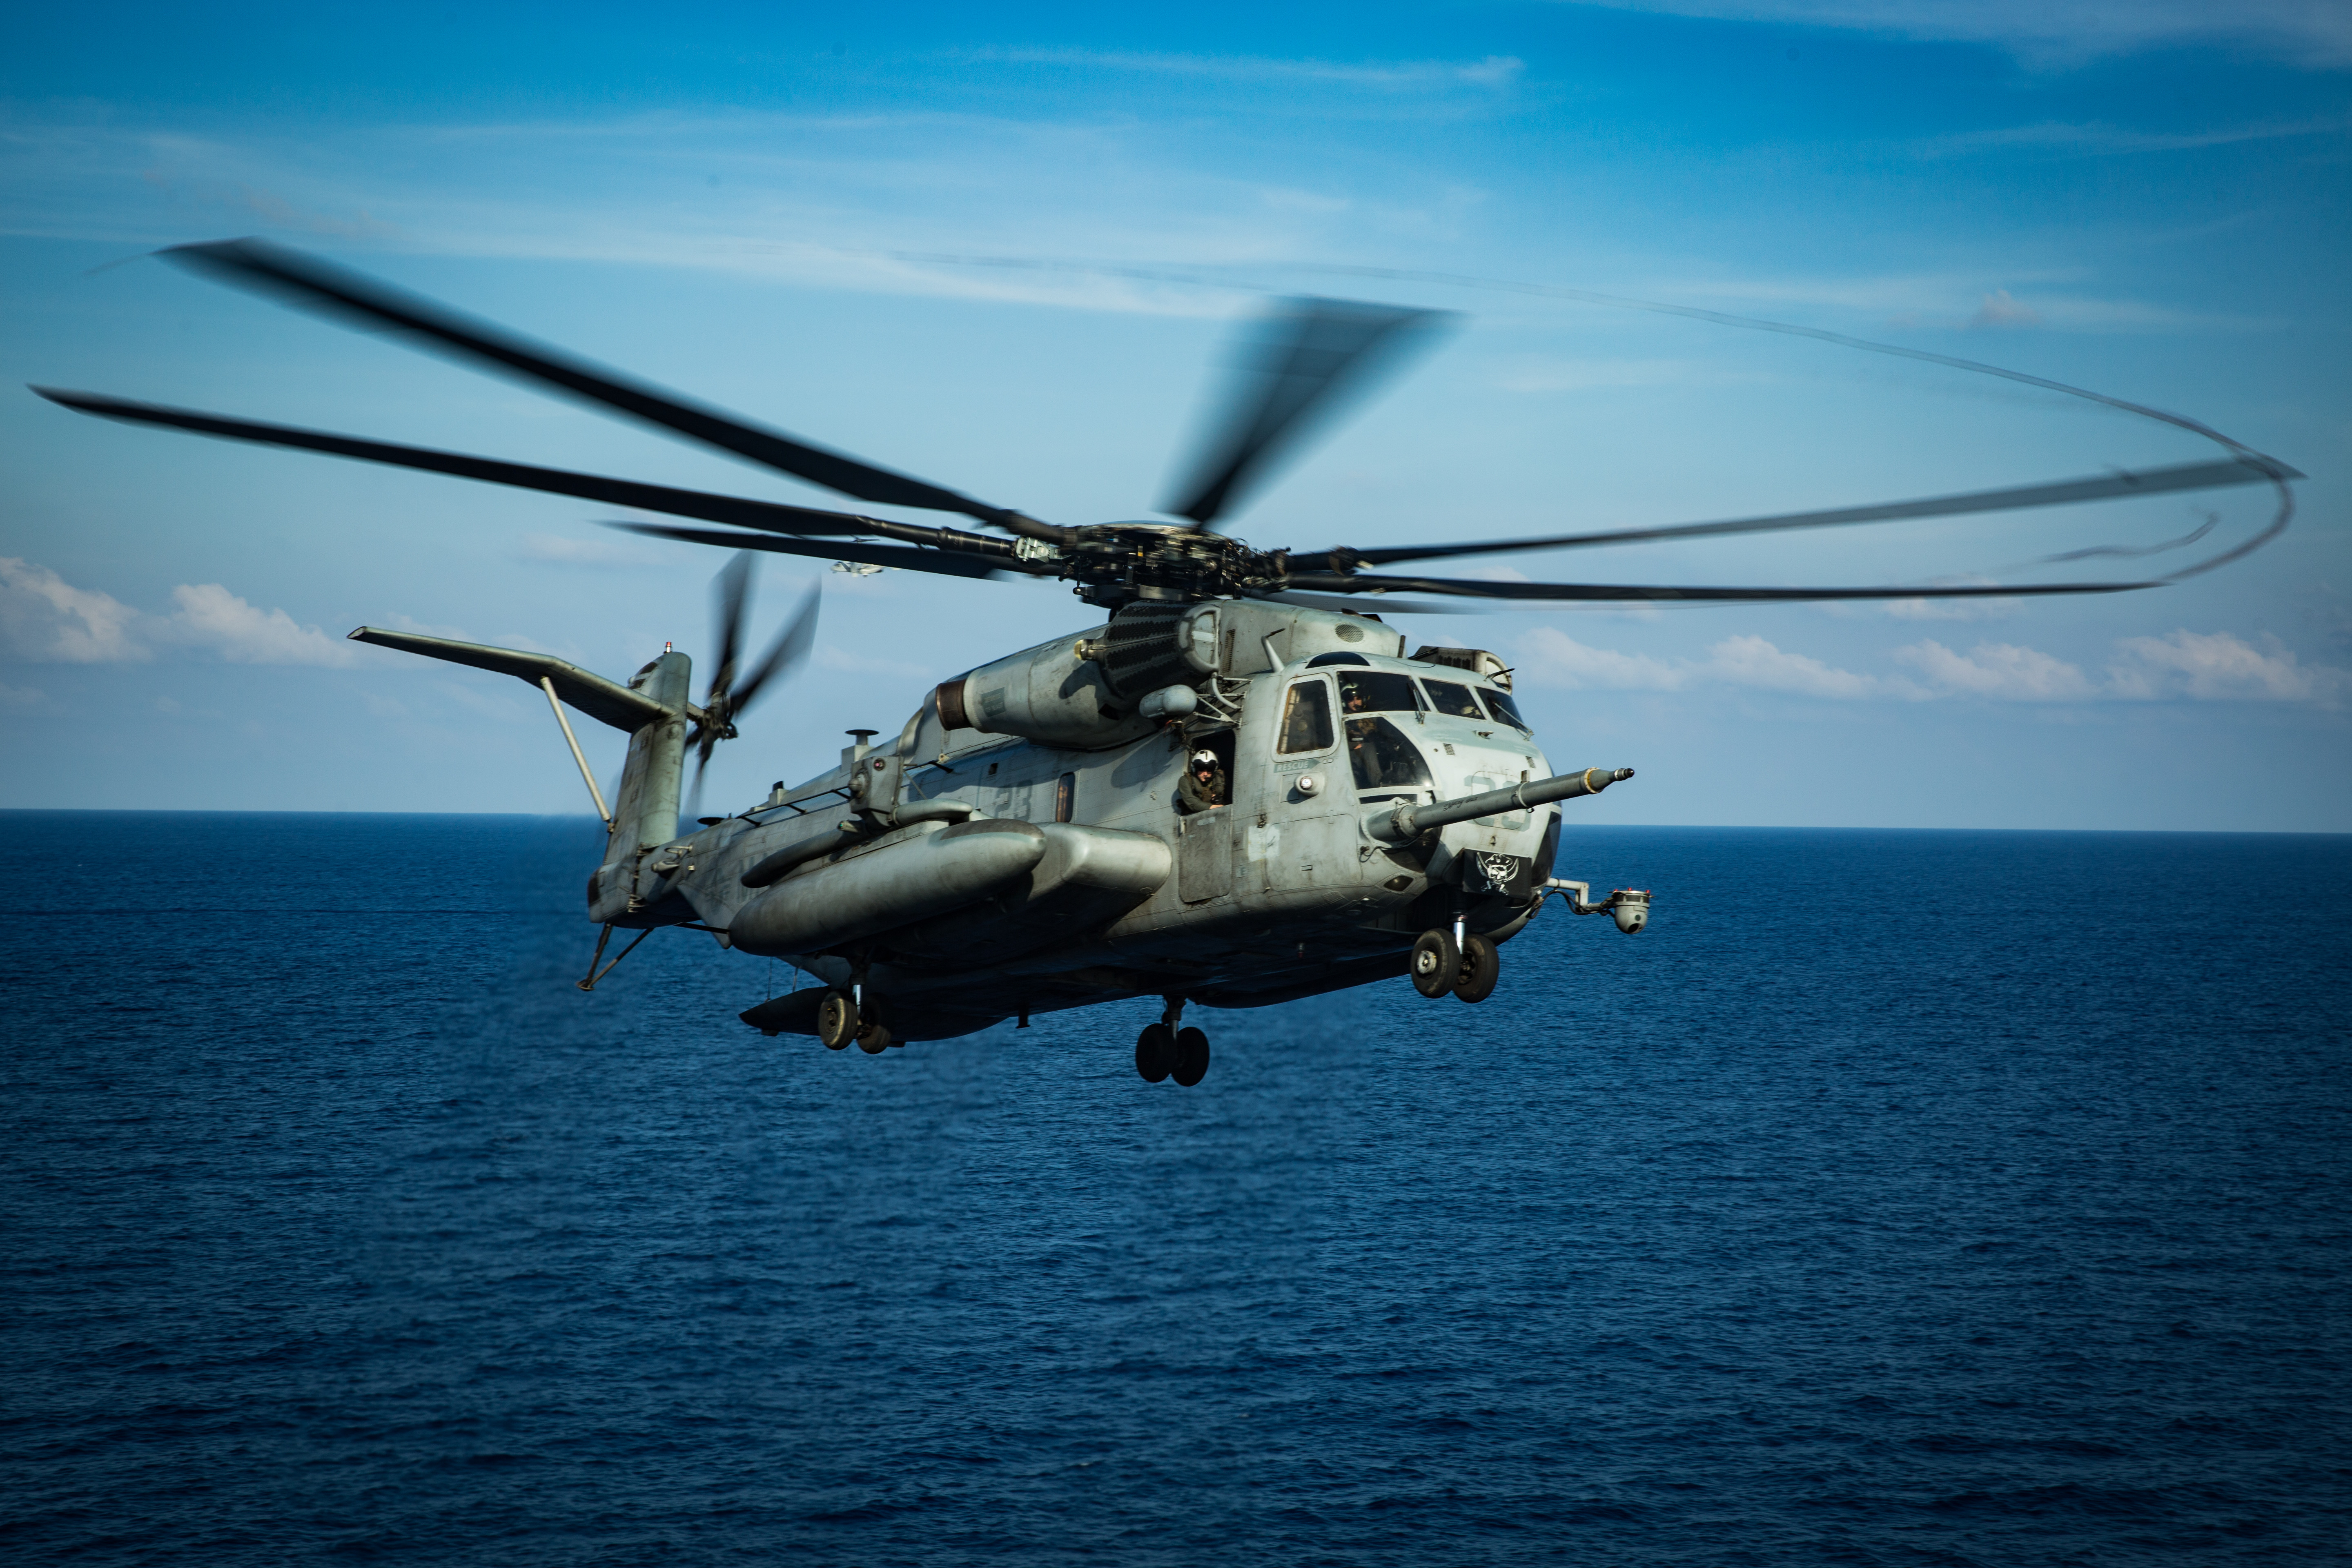 A CH-53E Super Stallion helicopter with Marine Medium Tiltrotor Squadron (VMM) 265 (Reinforced), 31st Marine Expeditionary Unit (MEU), lands on the flight deck of amphibious assault ship USS America (LHA 6) during flight operations. Marines and Sailors aboard the America regularly conduct flight operations while underway to maintain their readiness to respond to contingencies. America, flagship of the America Expeditionary Strike Group, 31st MEU team, is operating in the U.S. 7th Fleet area of operations to enhance interoperability with allies and partners and serve as a ready response force to defend peace and stability in the Indo-Pacific region. (U.S. Marine Corps photo by Sgt. Audrey M. C. Rampton)